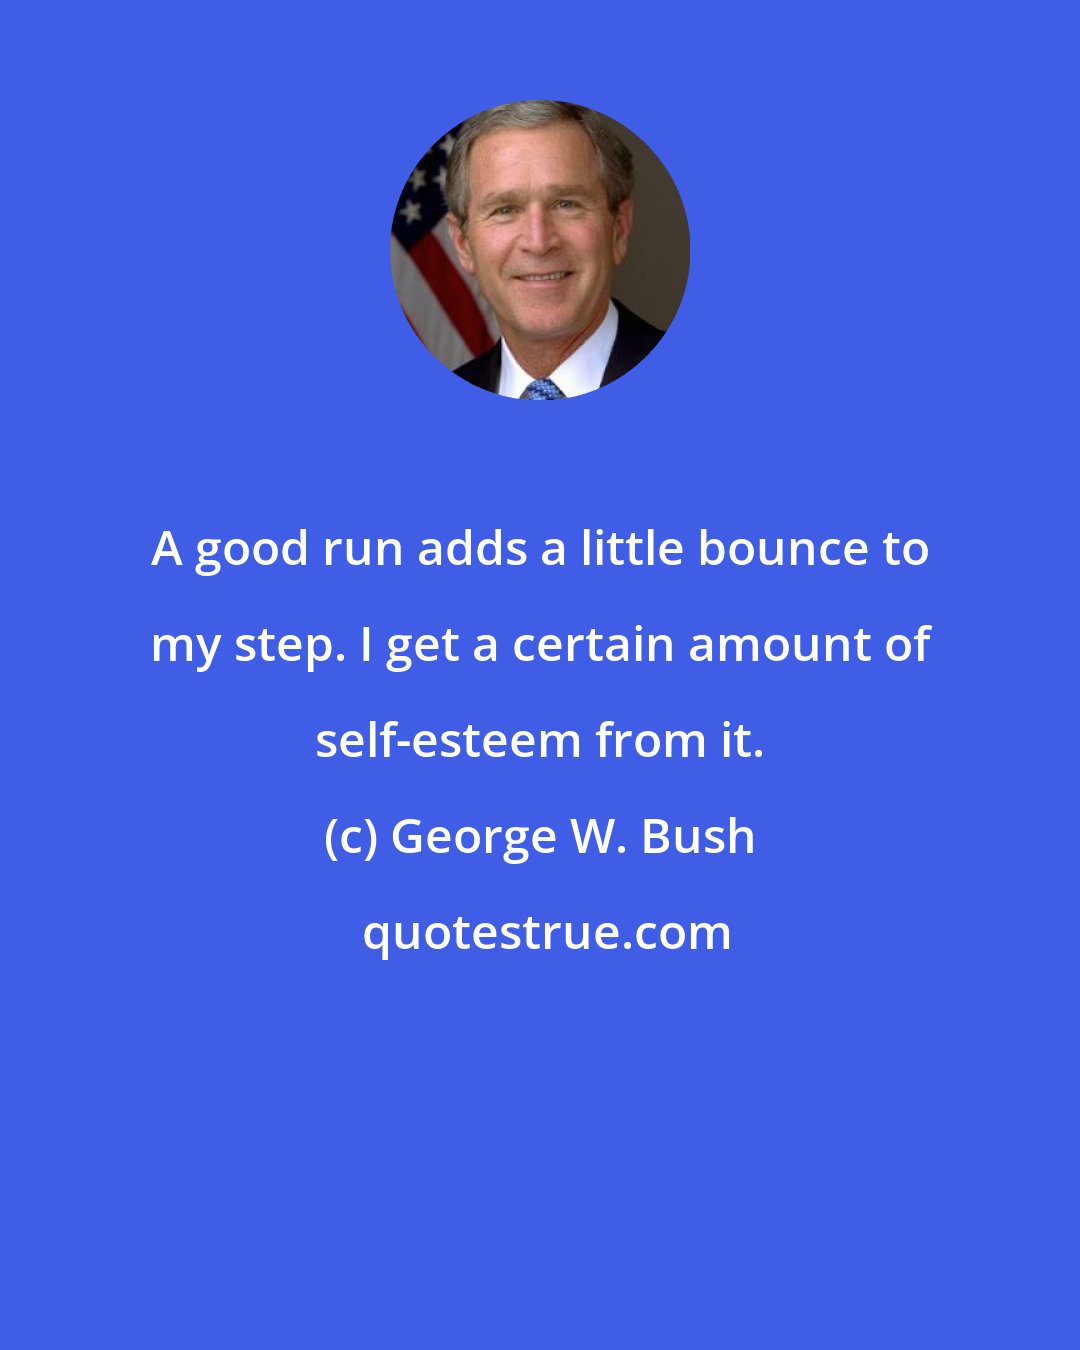 George W. Bush: A good run adds a little bounce to my step. I get a certain amount of self-esteem from it.